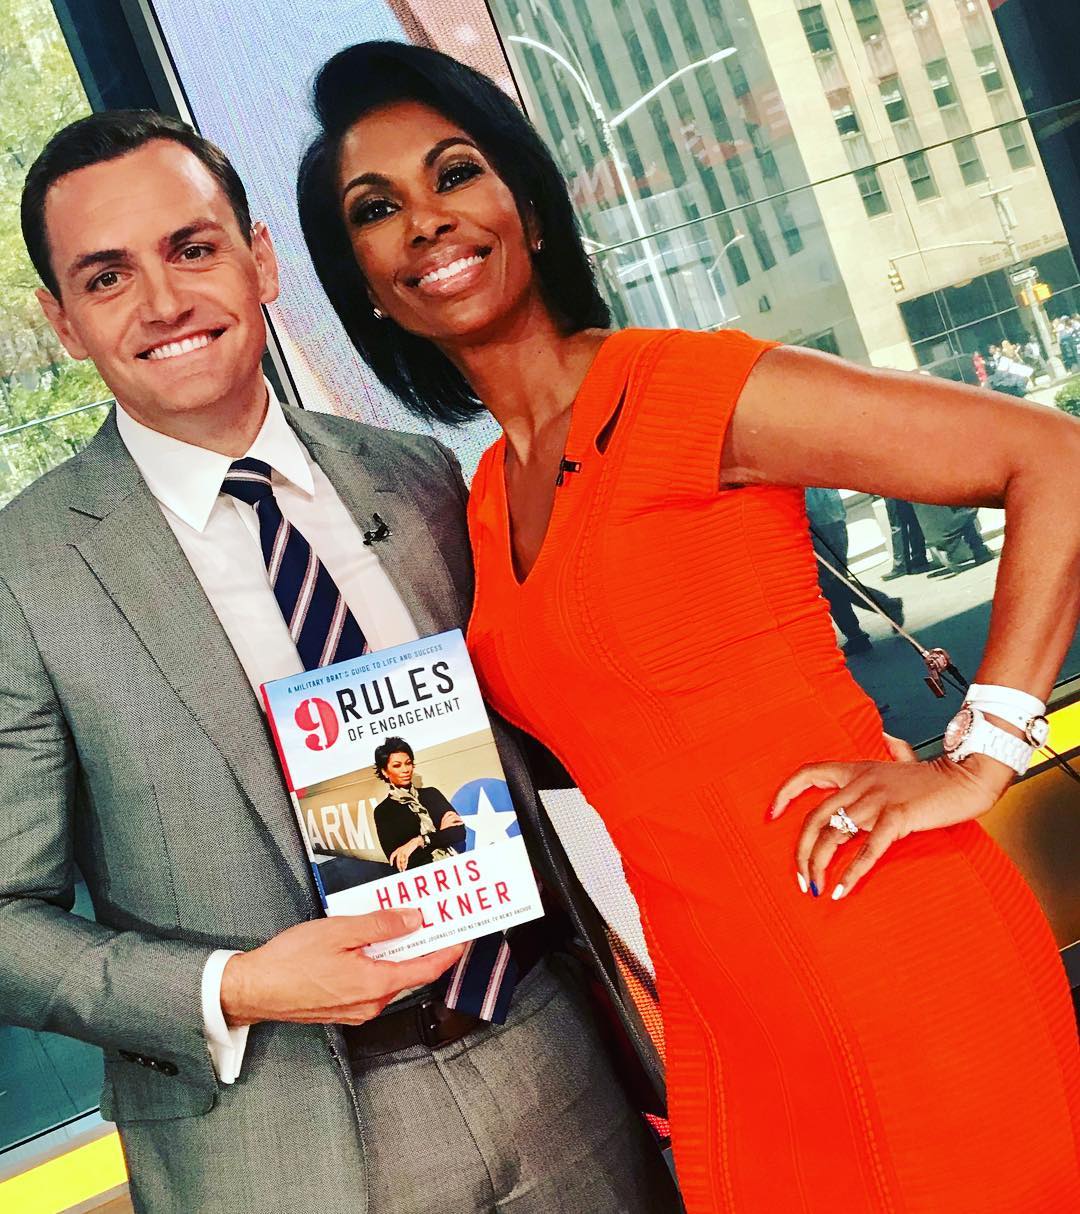 Mike Gallagher with Harris Faulkner holds Faulkner’s book, ‘9 Rules of Engagement’